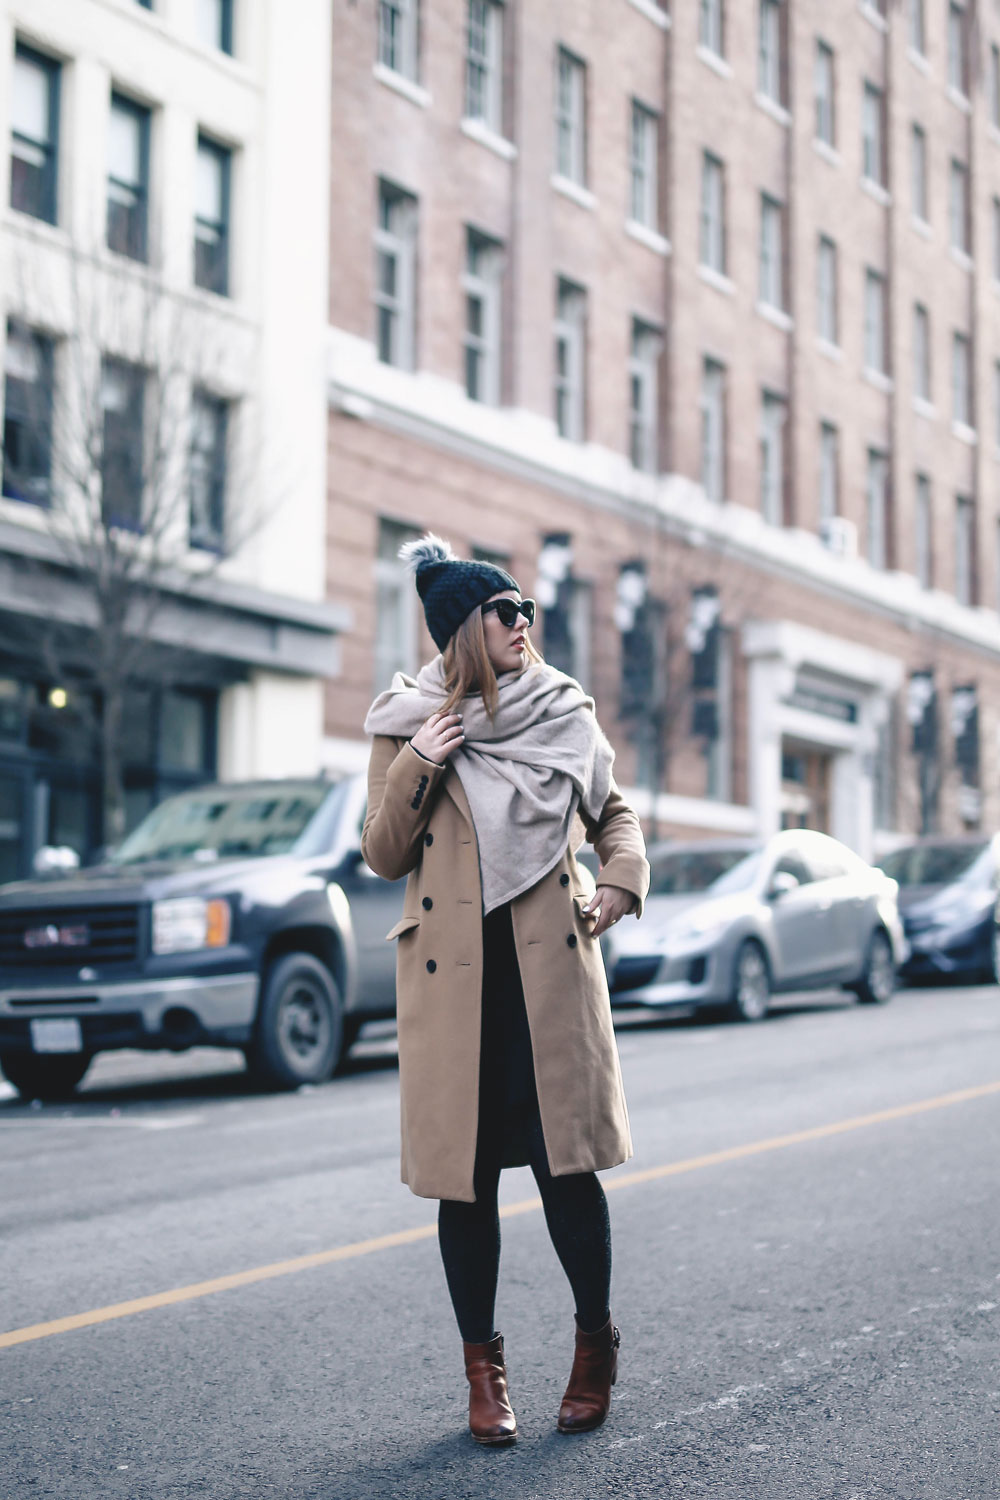 Tips on wearing a dress in the winter styled by To Vogue or Bust in an Aritzia camel wool coat, White and Warren cashmere dress, White and Warren cashmere travel wrap, Frye ankle boots, Express beanie hat and Celine Caty sunglasses